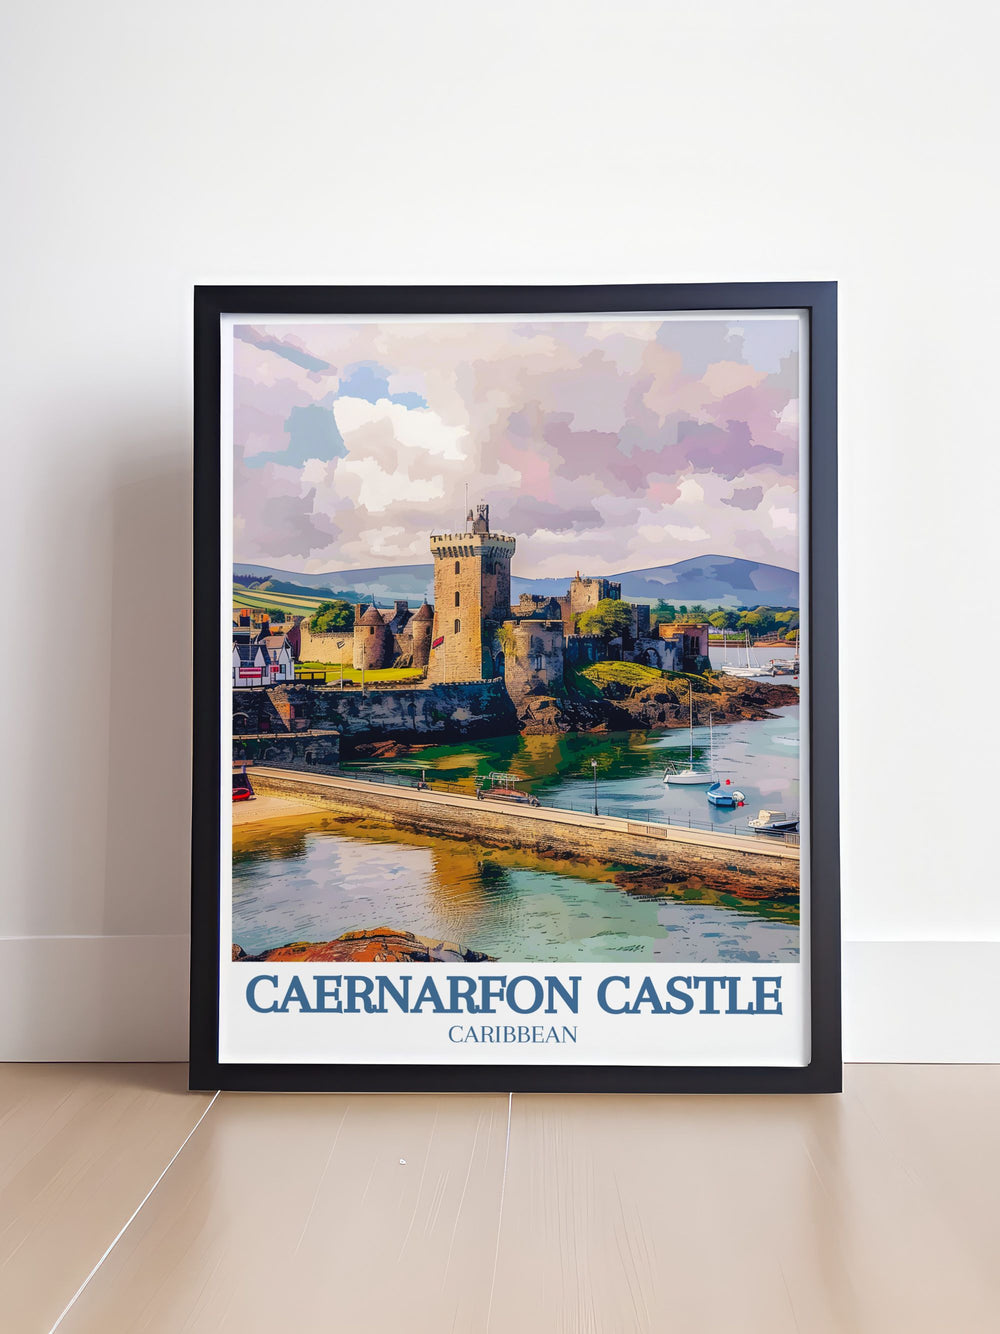 Beautiful Caernarfon Castle travel poster capturing the historic castle, the tranquil Menai Strait, and the breathtaking Snowdonia Ranger, perfect for enhancing your home or office with Wales iconic landmarks.